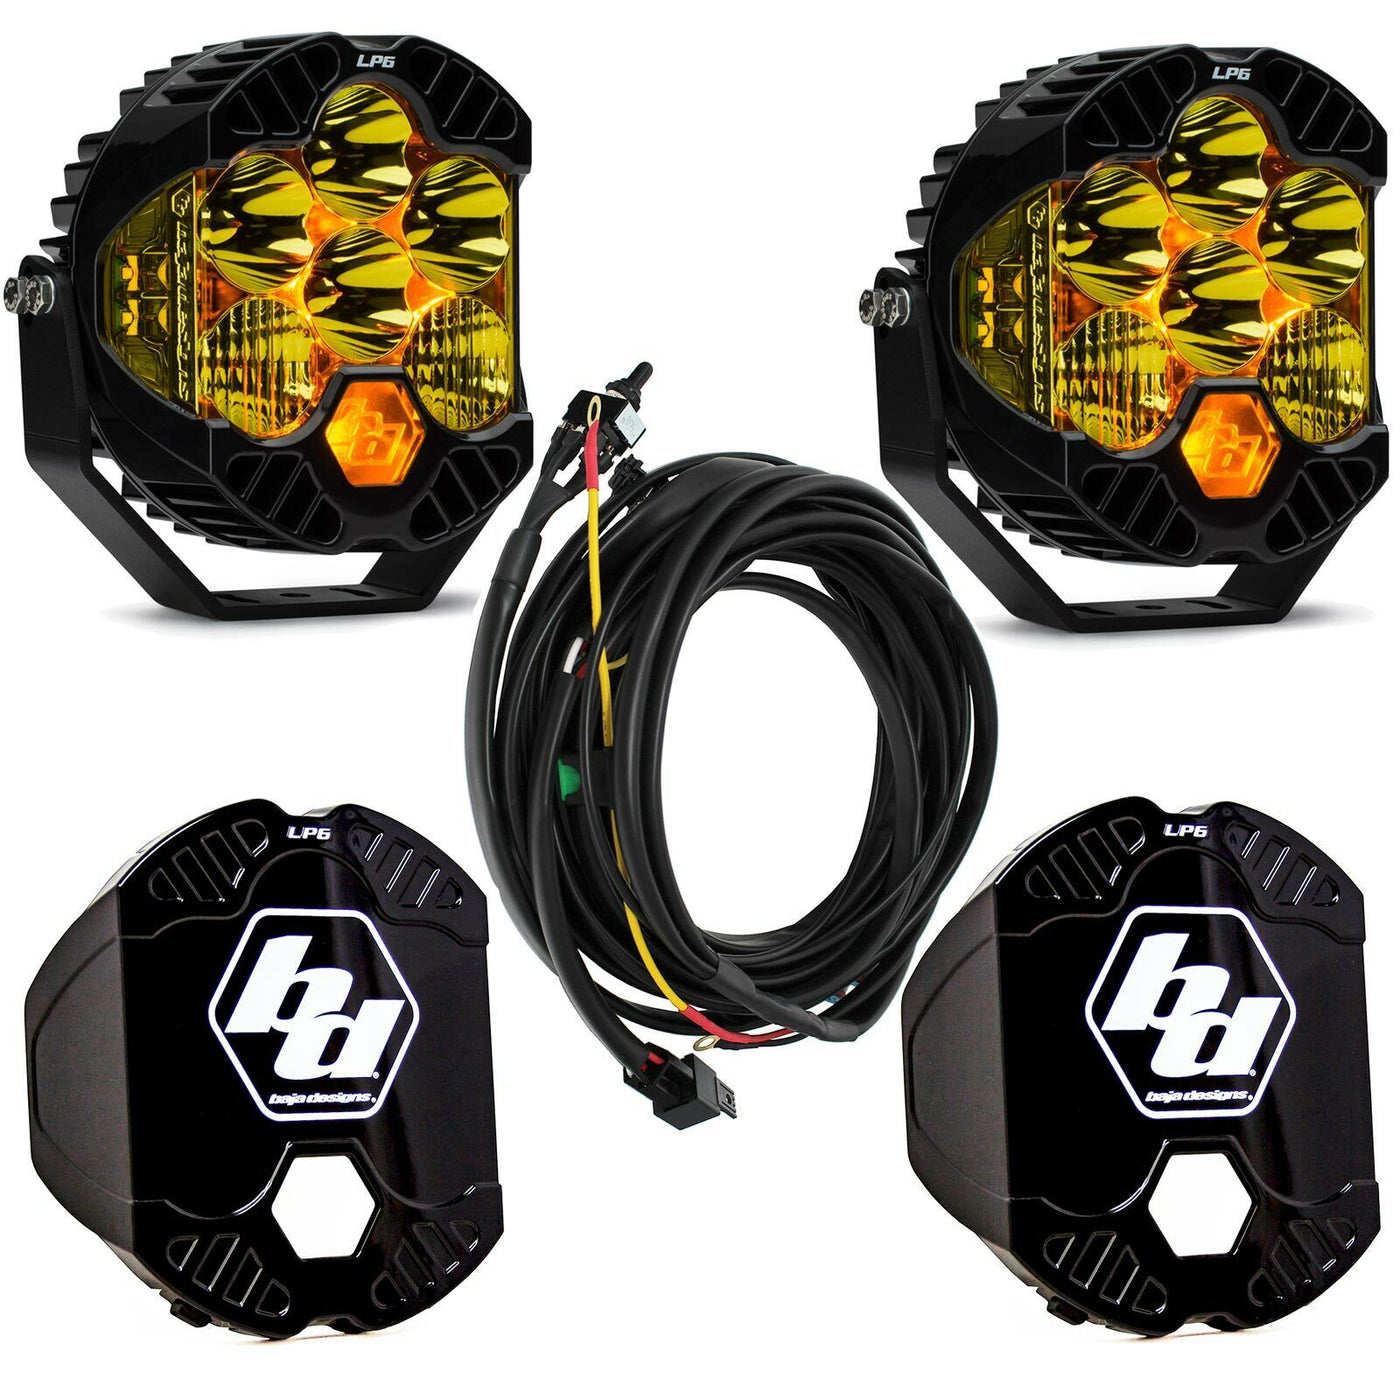 Baja Designs Pair LP6 Pro LED Amber Driving/Combo Light + Harness Kit with Free Rock Guards